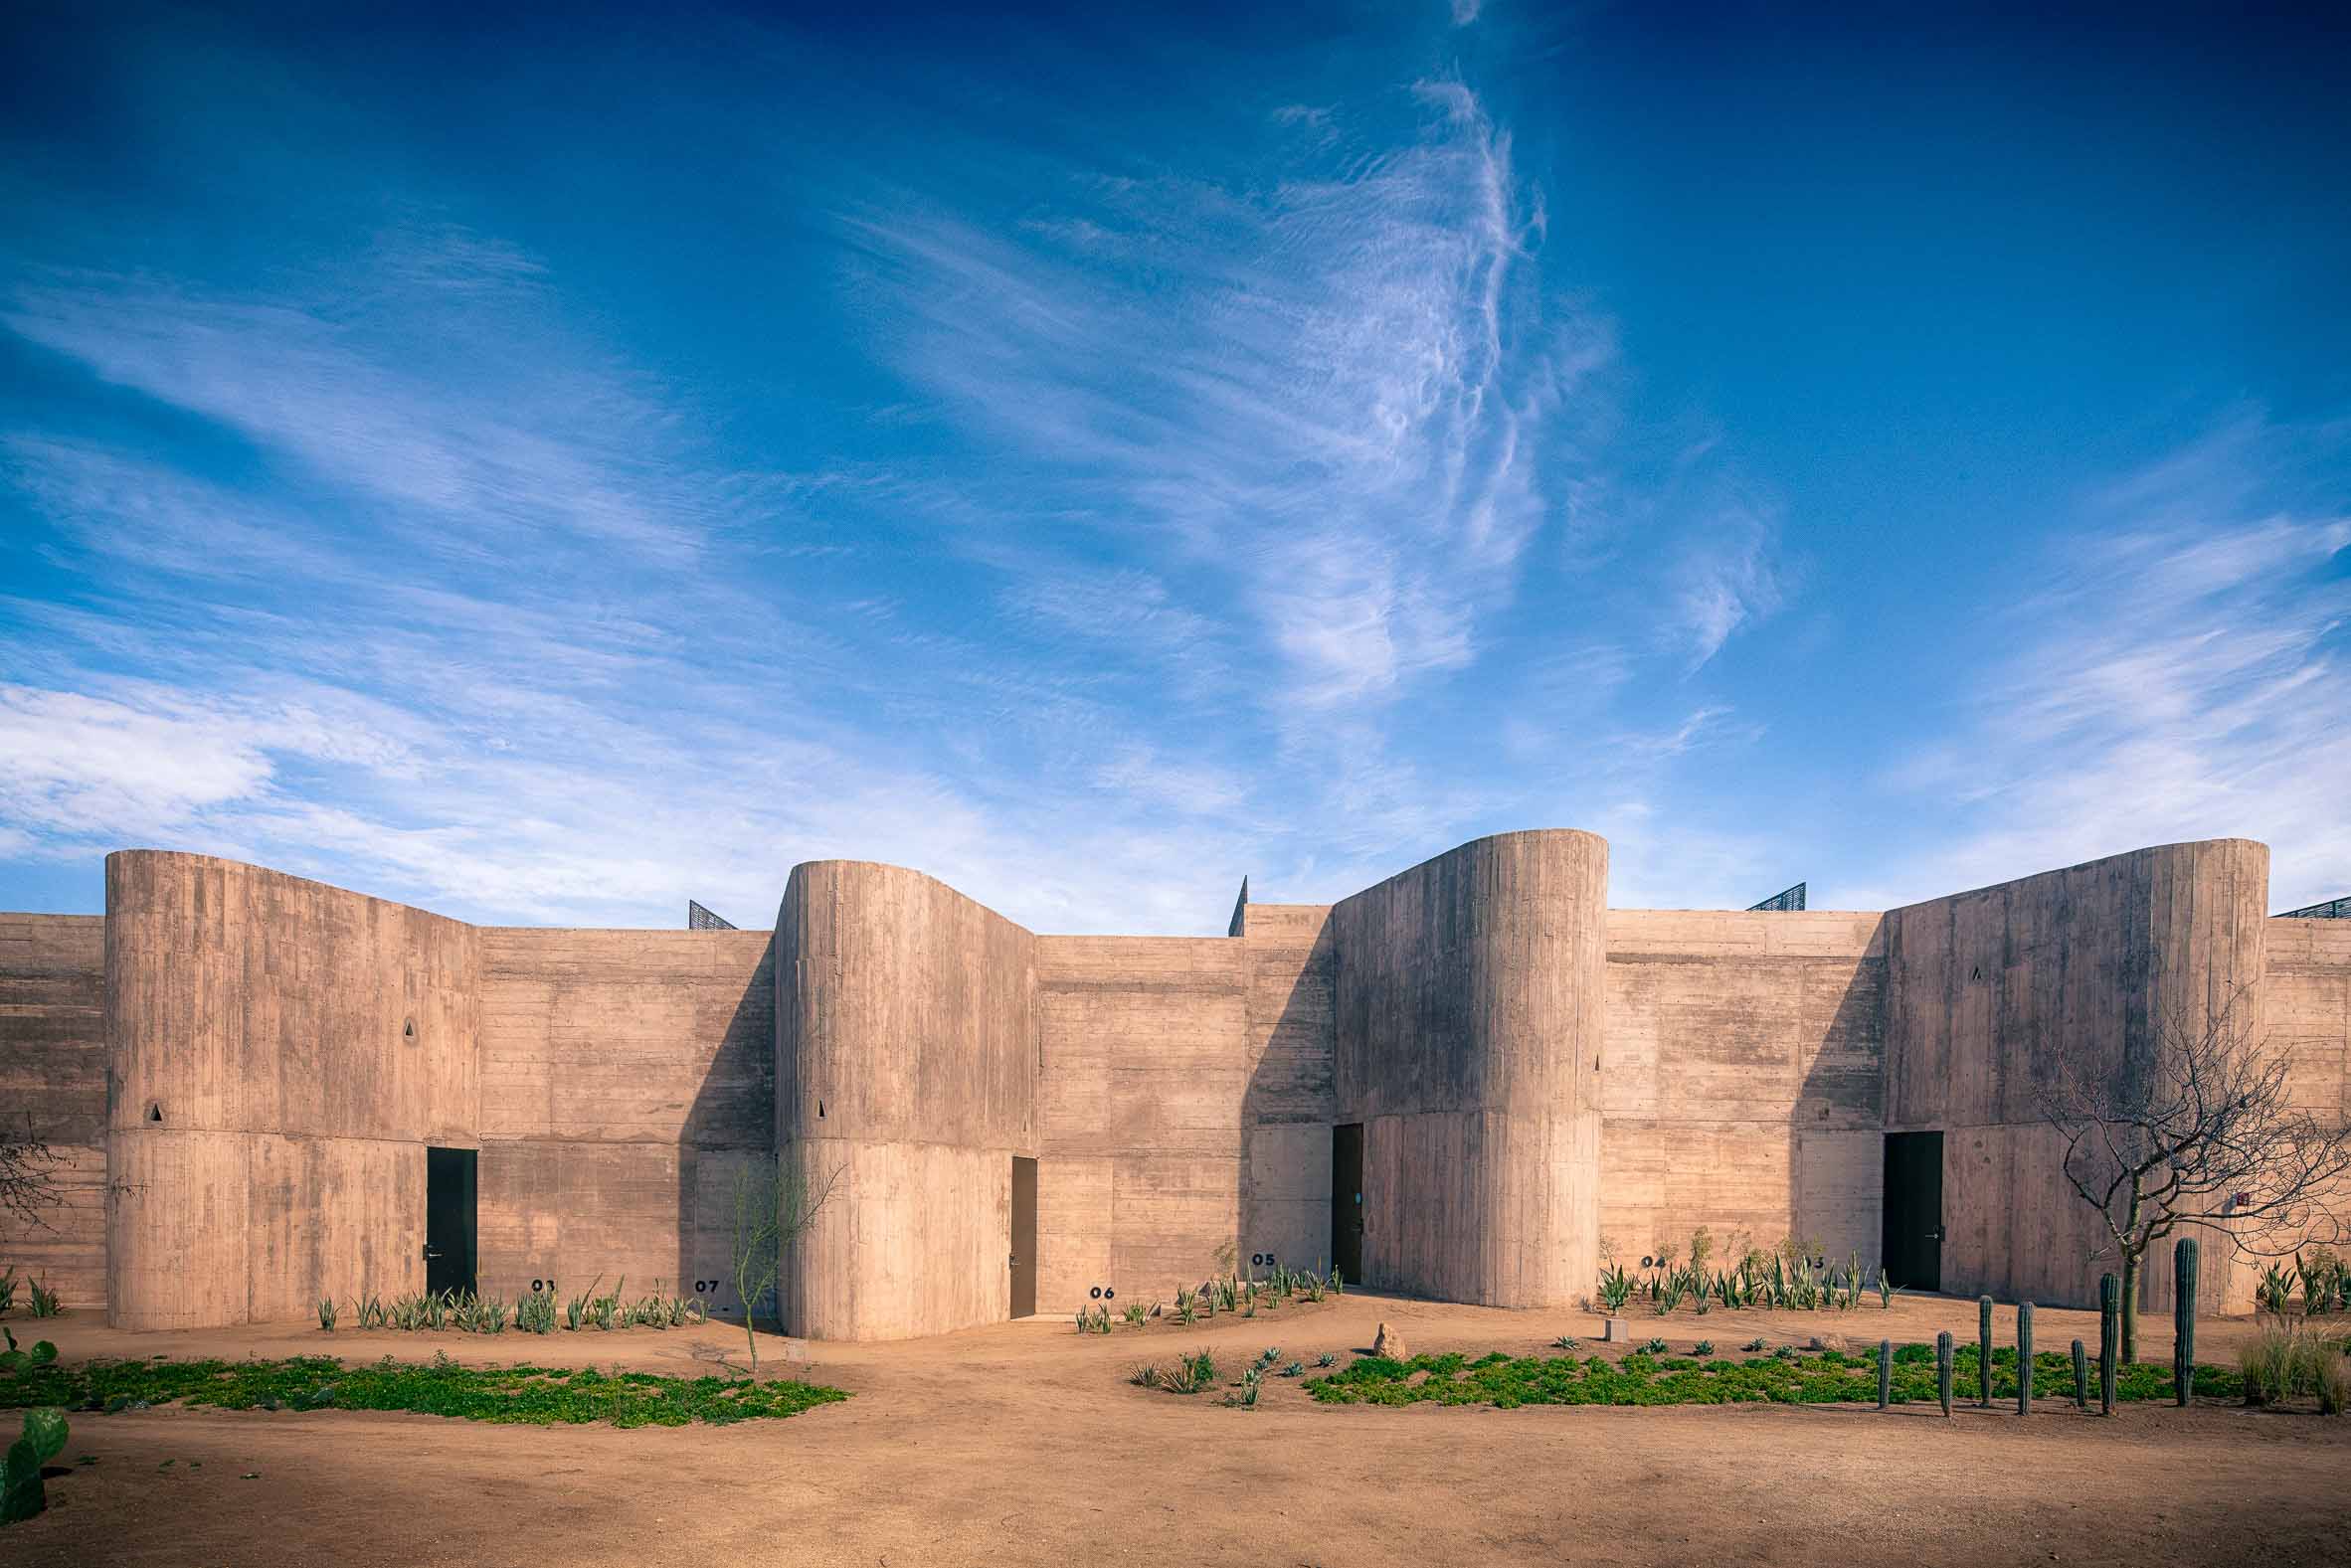 A sight that takes your breath away. The brutalist structure of Paradero emerges from the desert